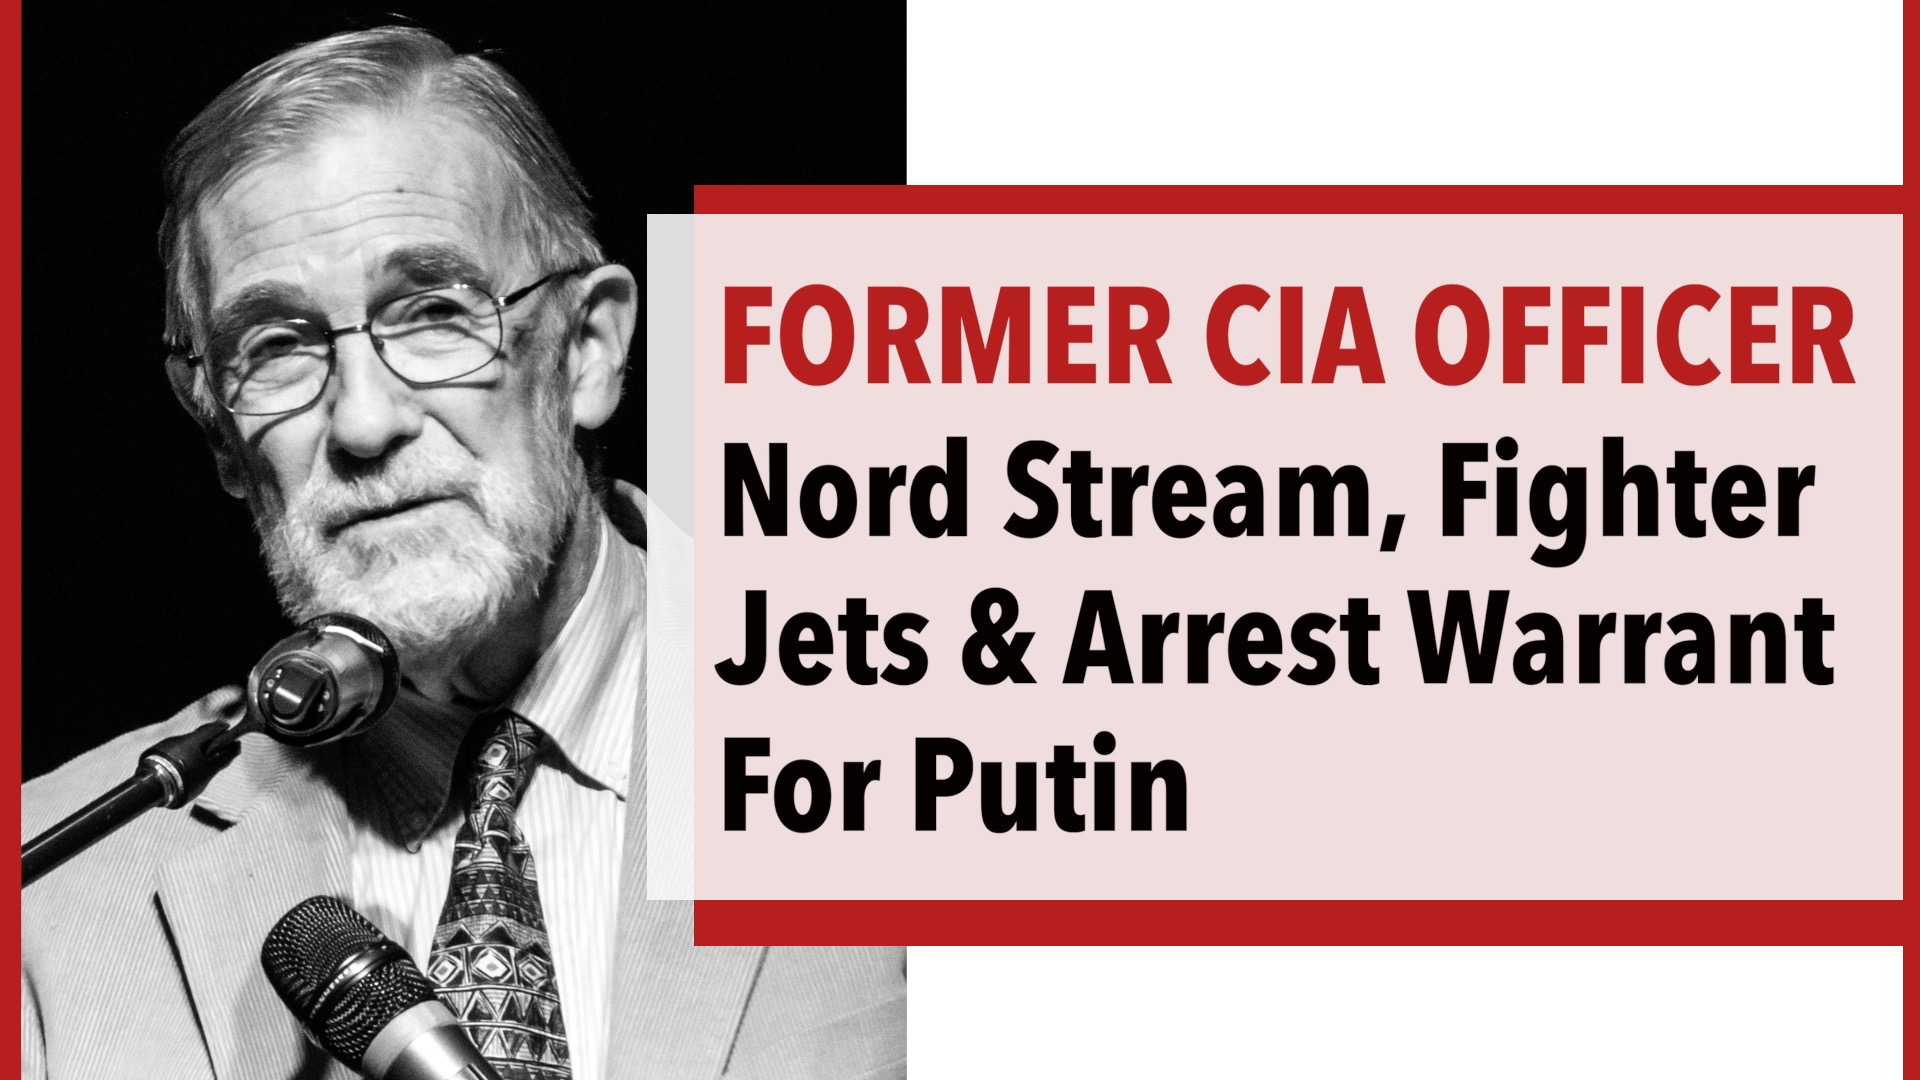 Former CIA Officer McGovern on Nord Stream, Fighter Jets & the Arrest Warrant for Putin (PART 2)